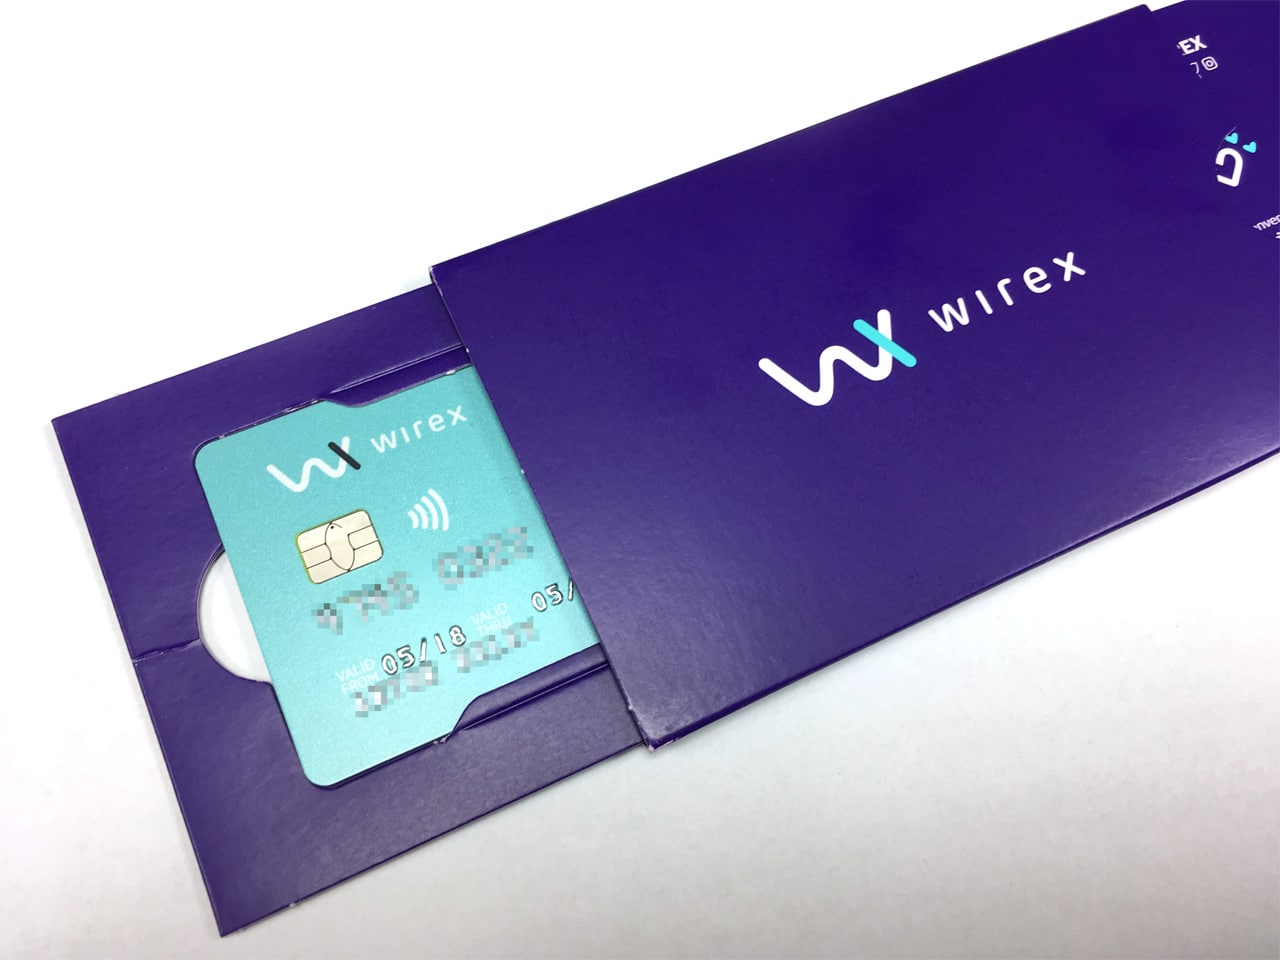  e-money wirex license receives all authority conduct 